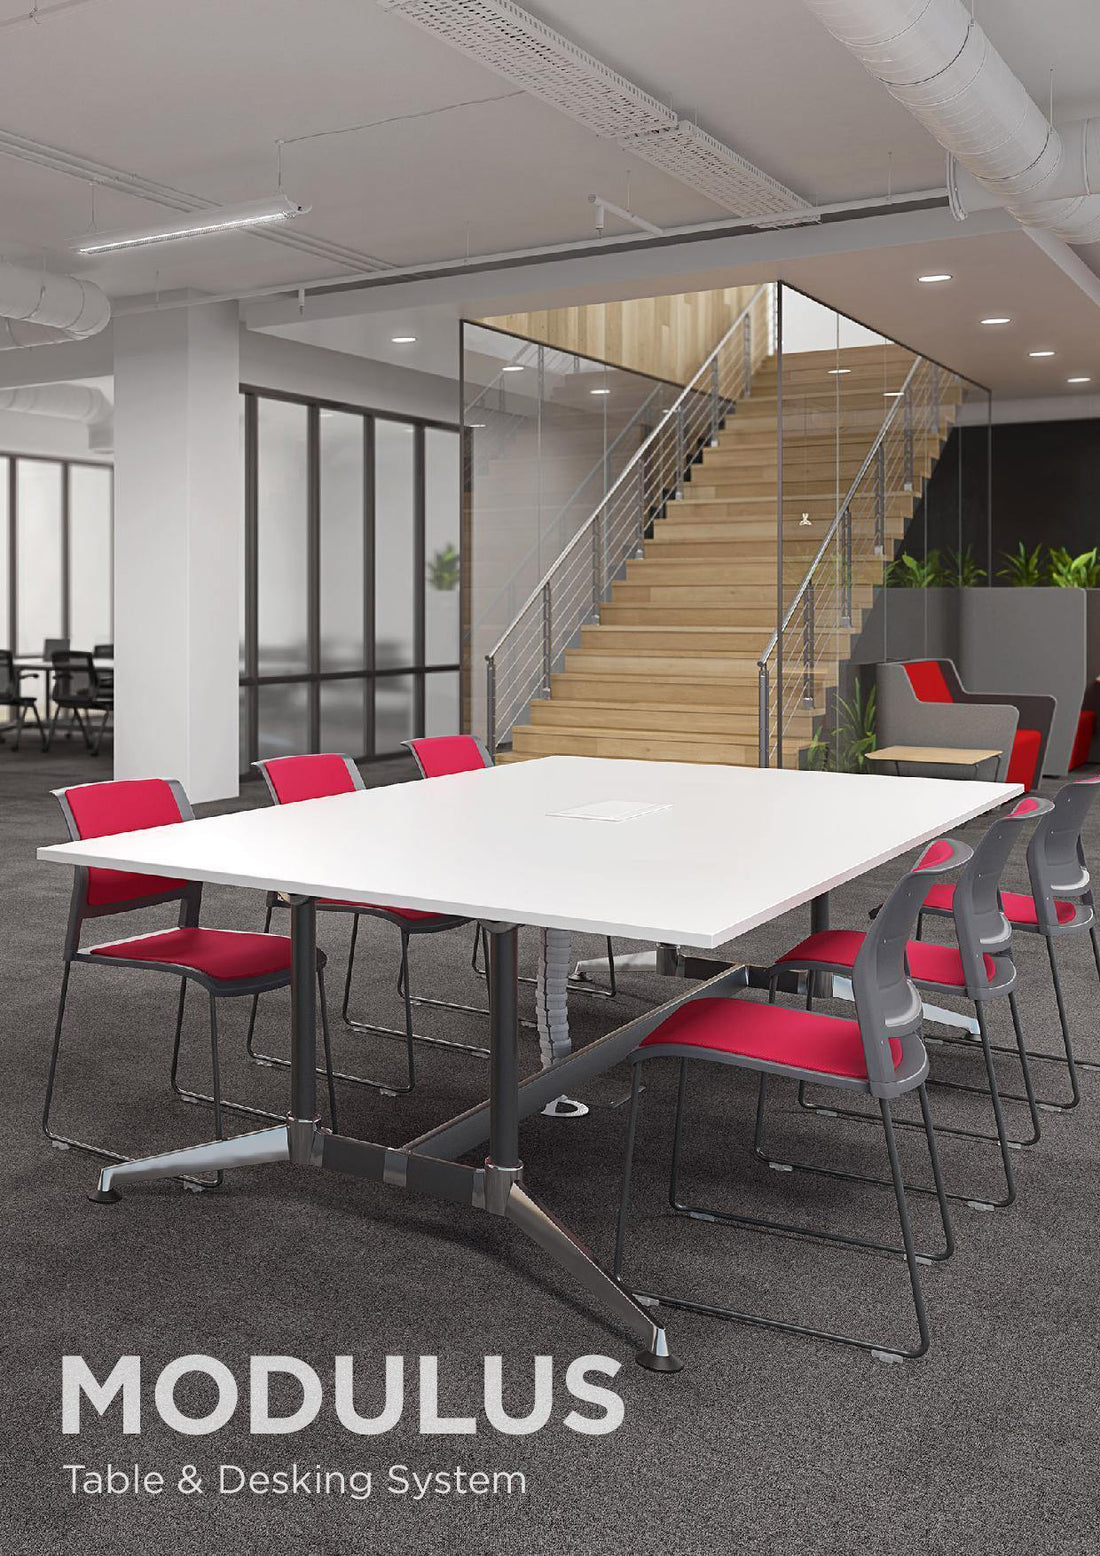 The MODULUS Table & Desking System - Office Furniture Company 